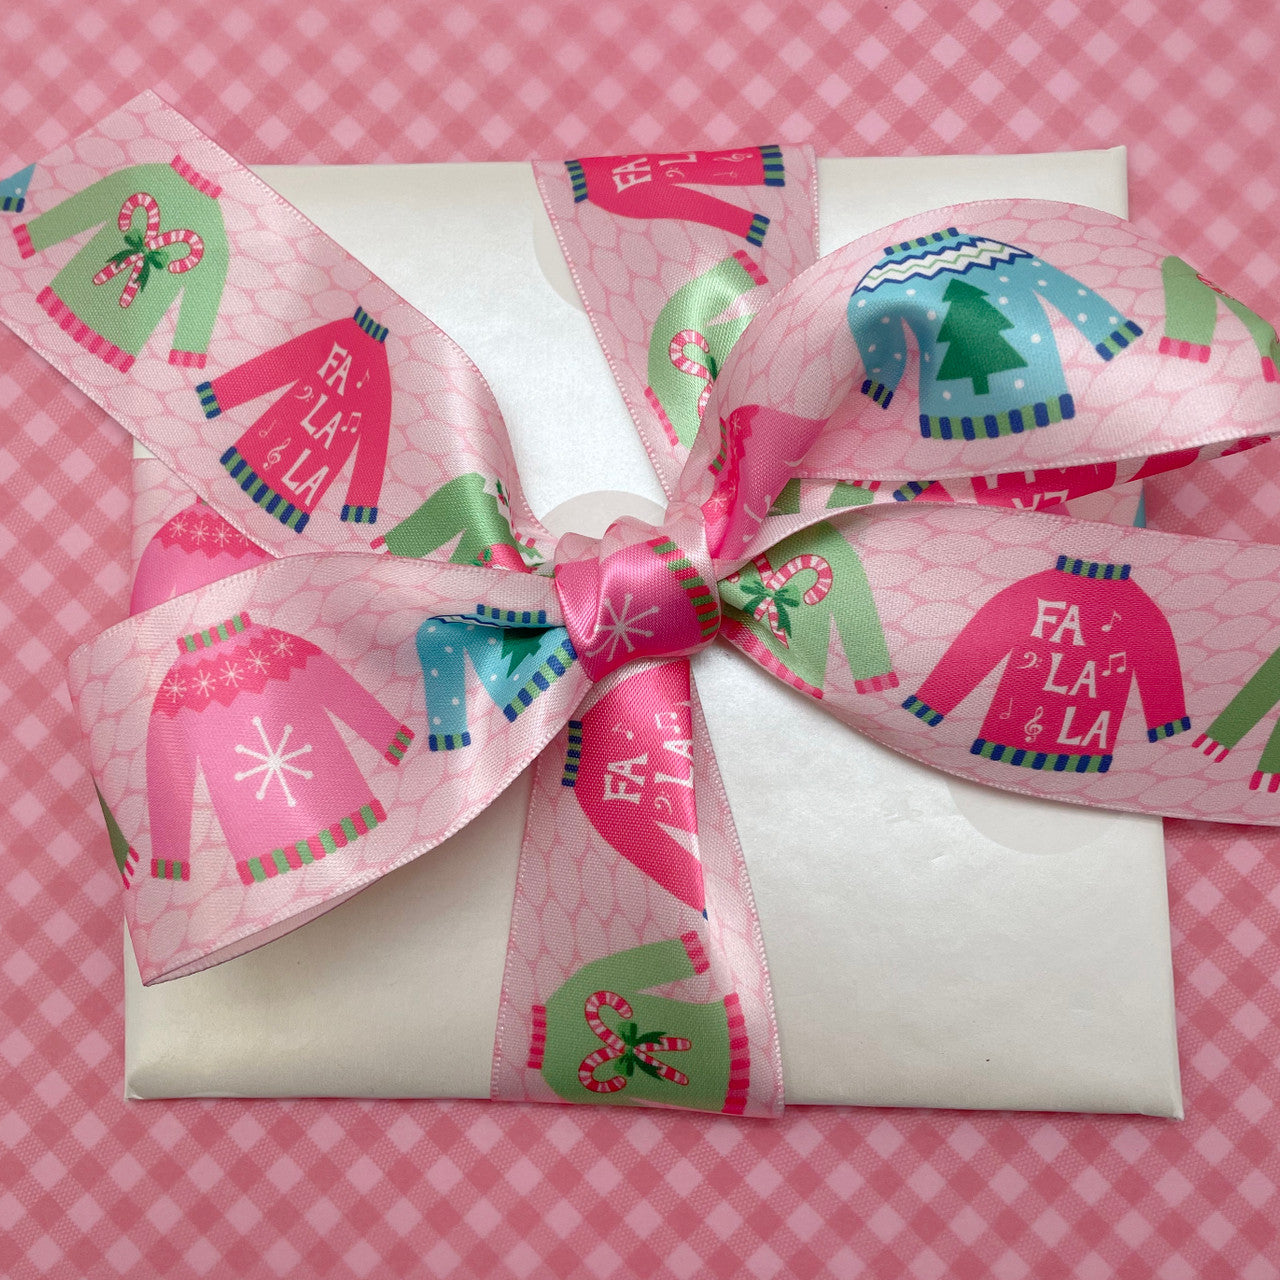 Tie a beautiful bow on a special present for the prettiest gift of the Season! 